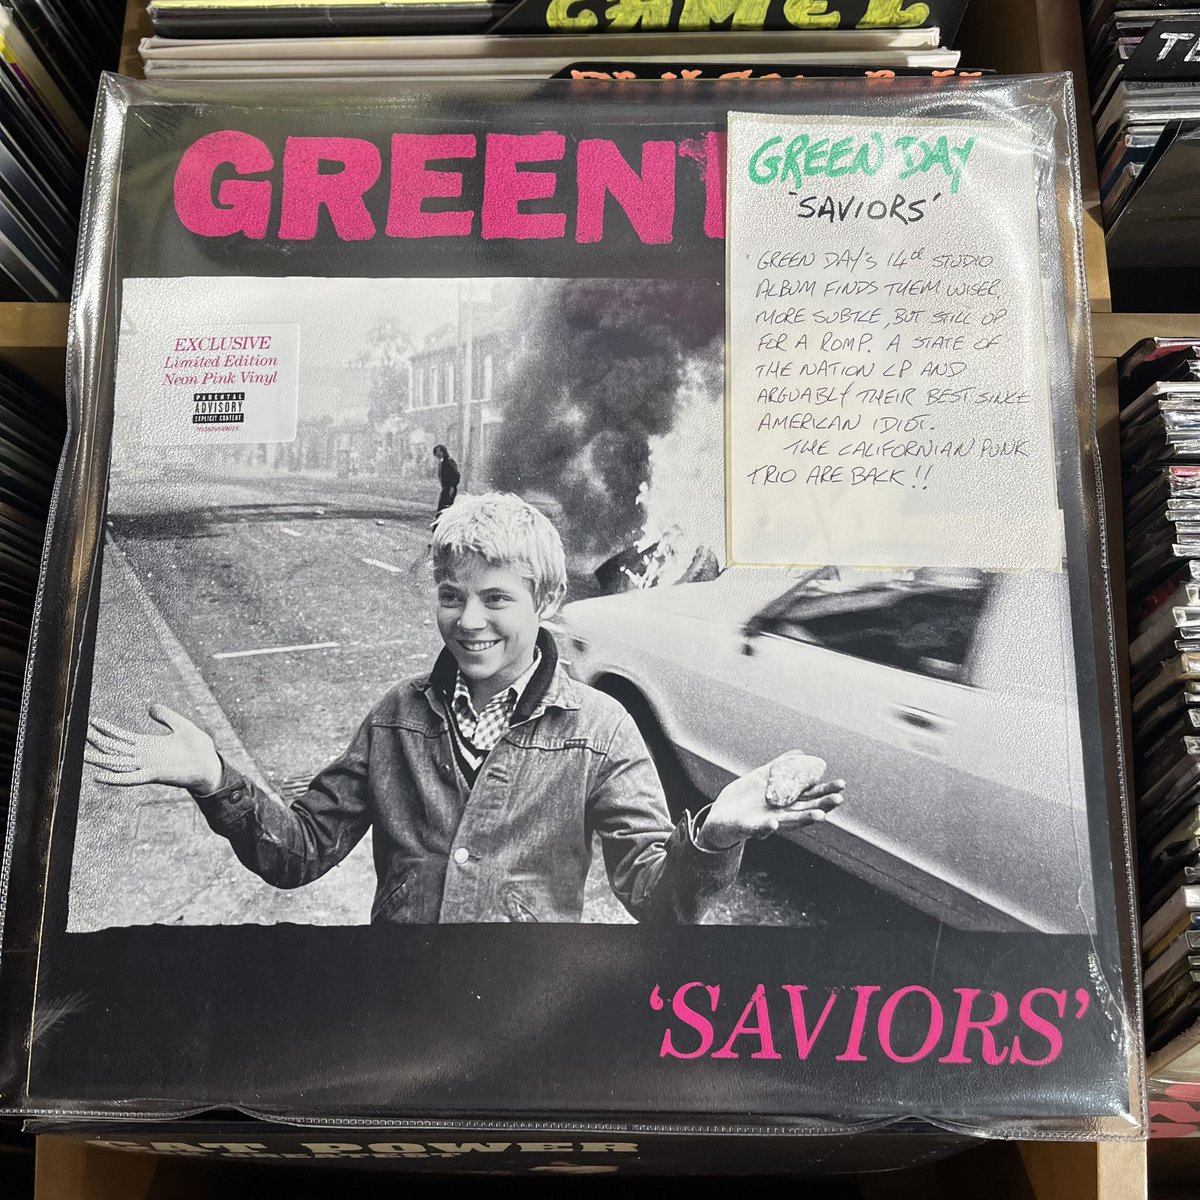 Looking for something different? Check out some of our staff recommendations in-store today to discover your new favourite artist 🎵🎸

#arcticmonkeys #brucespringsteen #greenday #staffpicks #vinyl #hmv